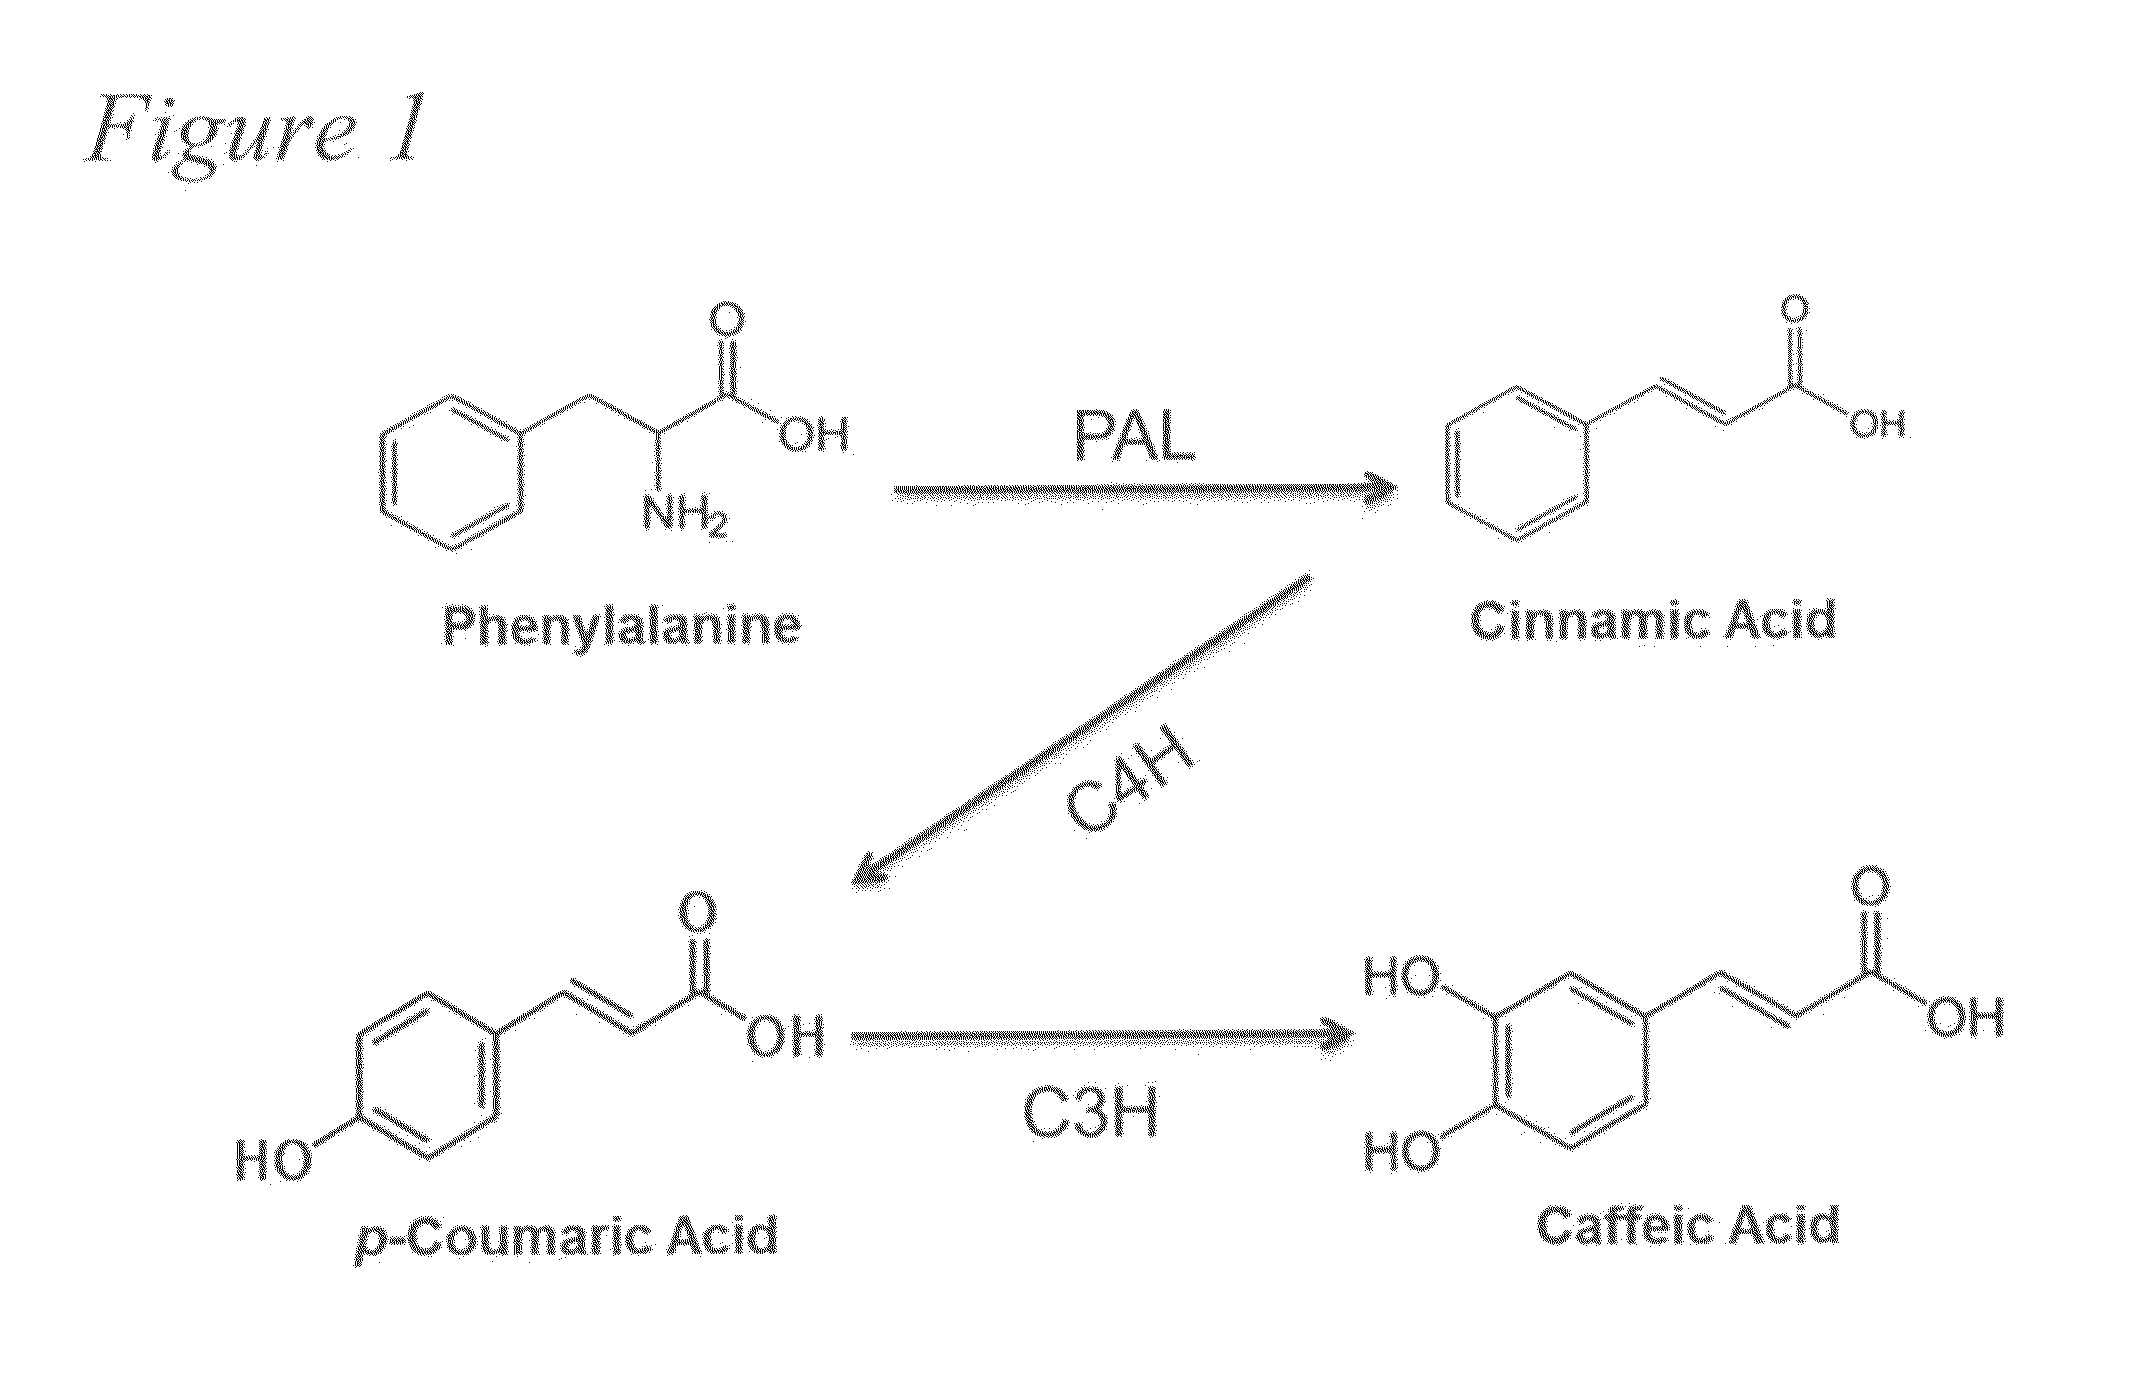 Biosynthesis of caffeic acid and caffeic acid derivatives by recombinant microorganisms